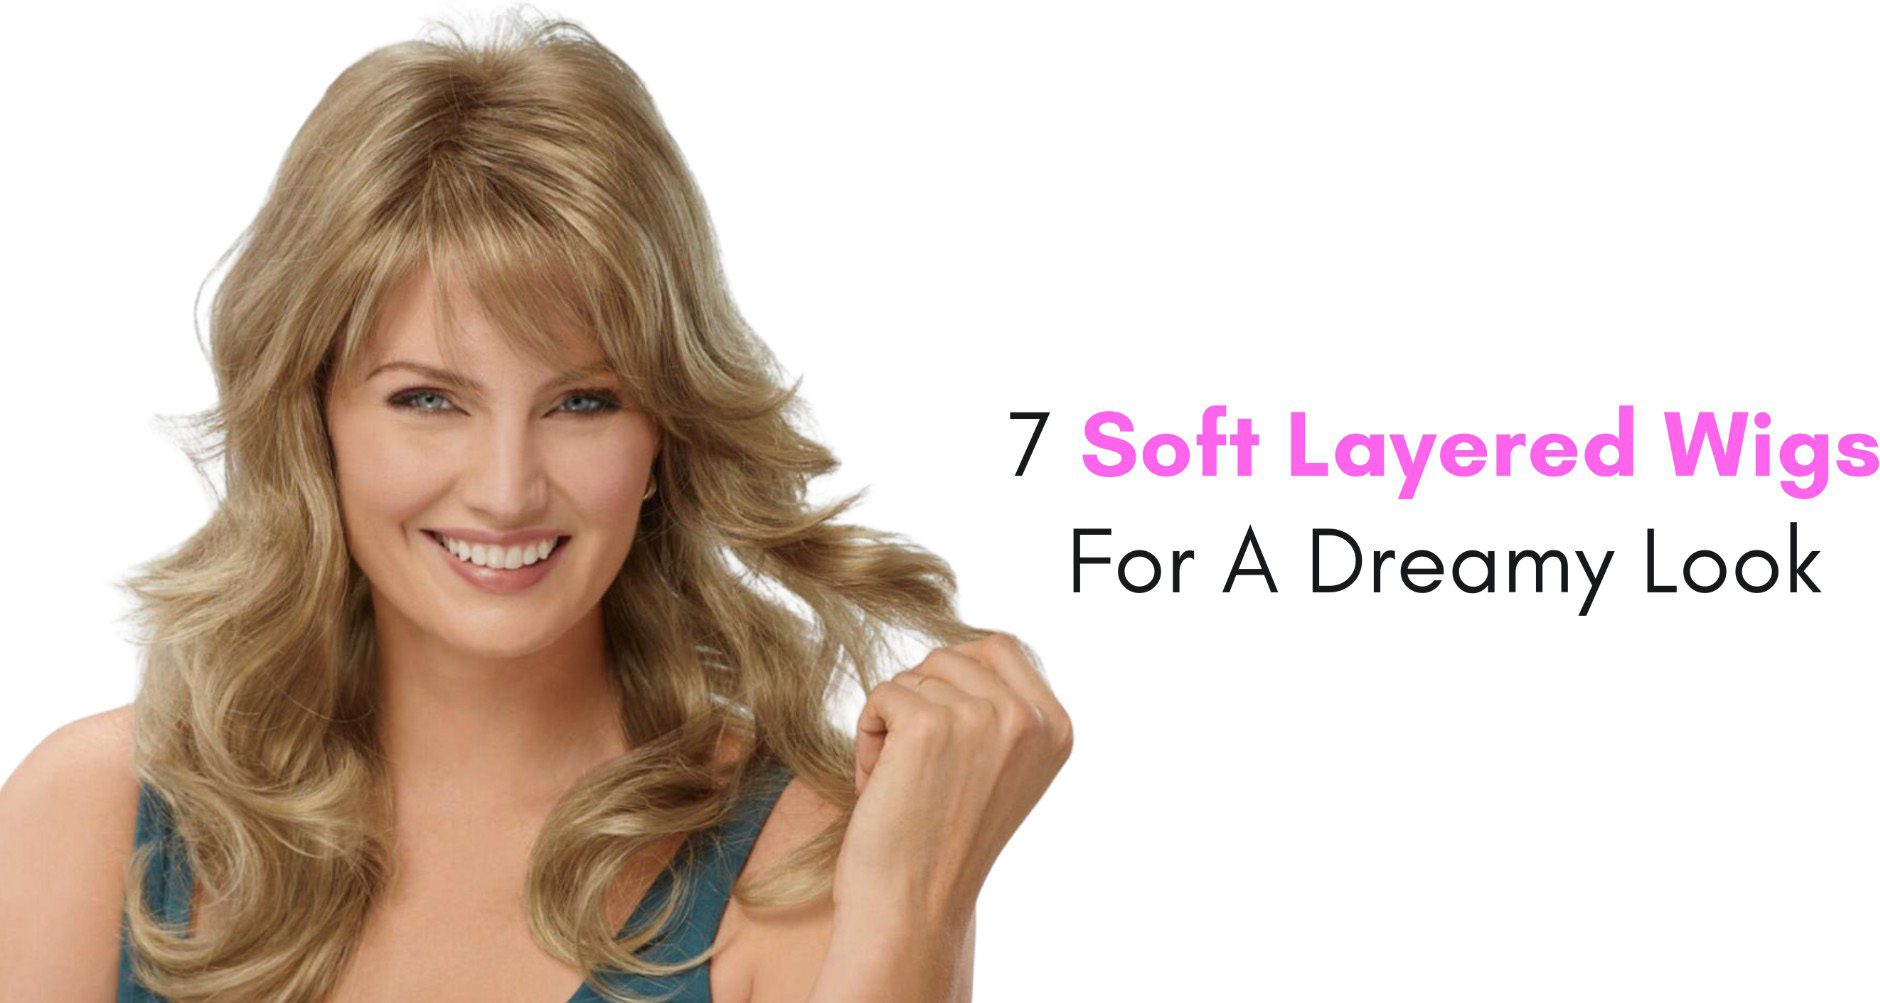 7 Soft Layered Wigs For A Dreamy Look